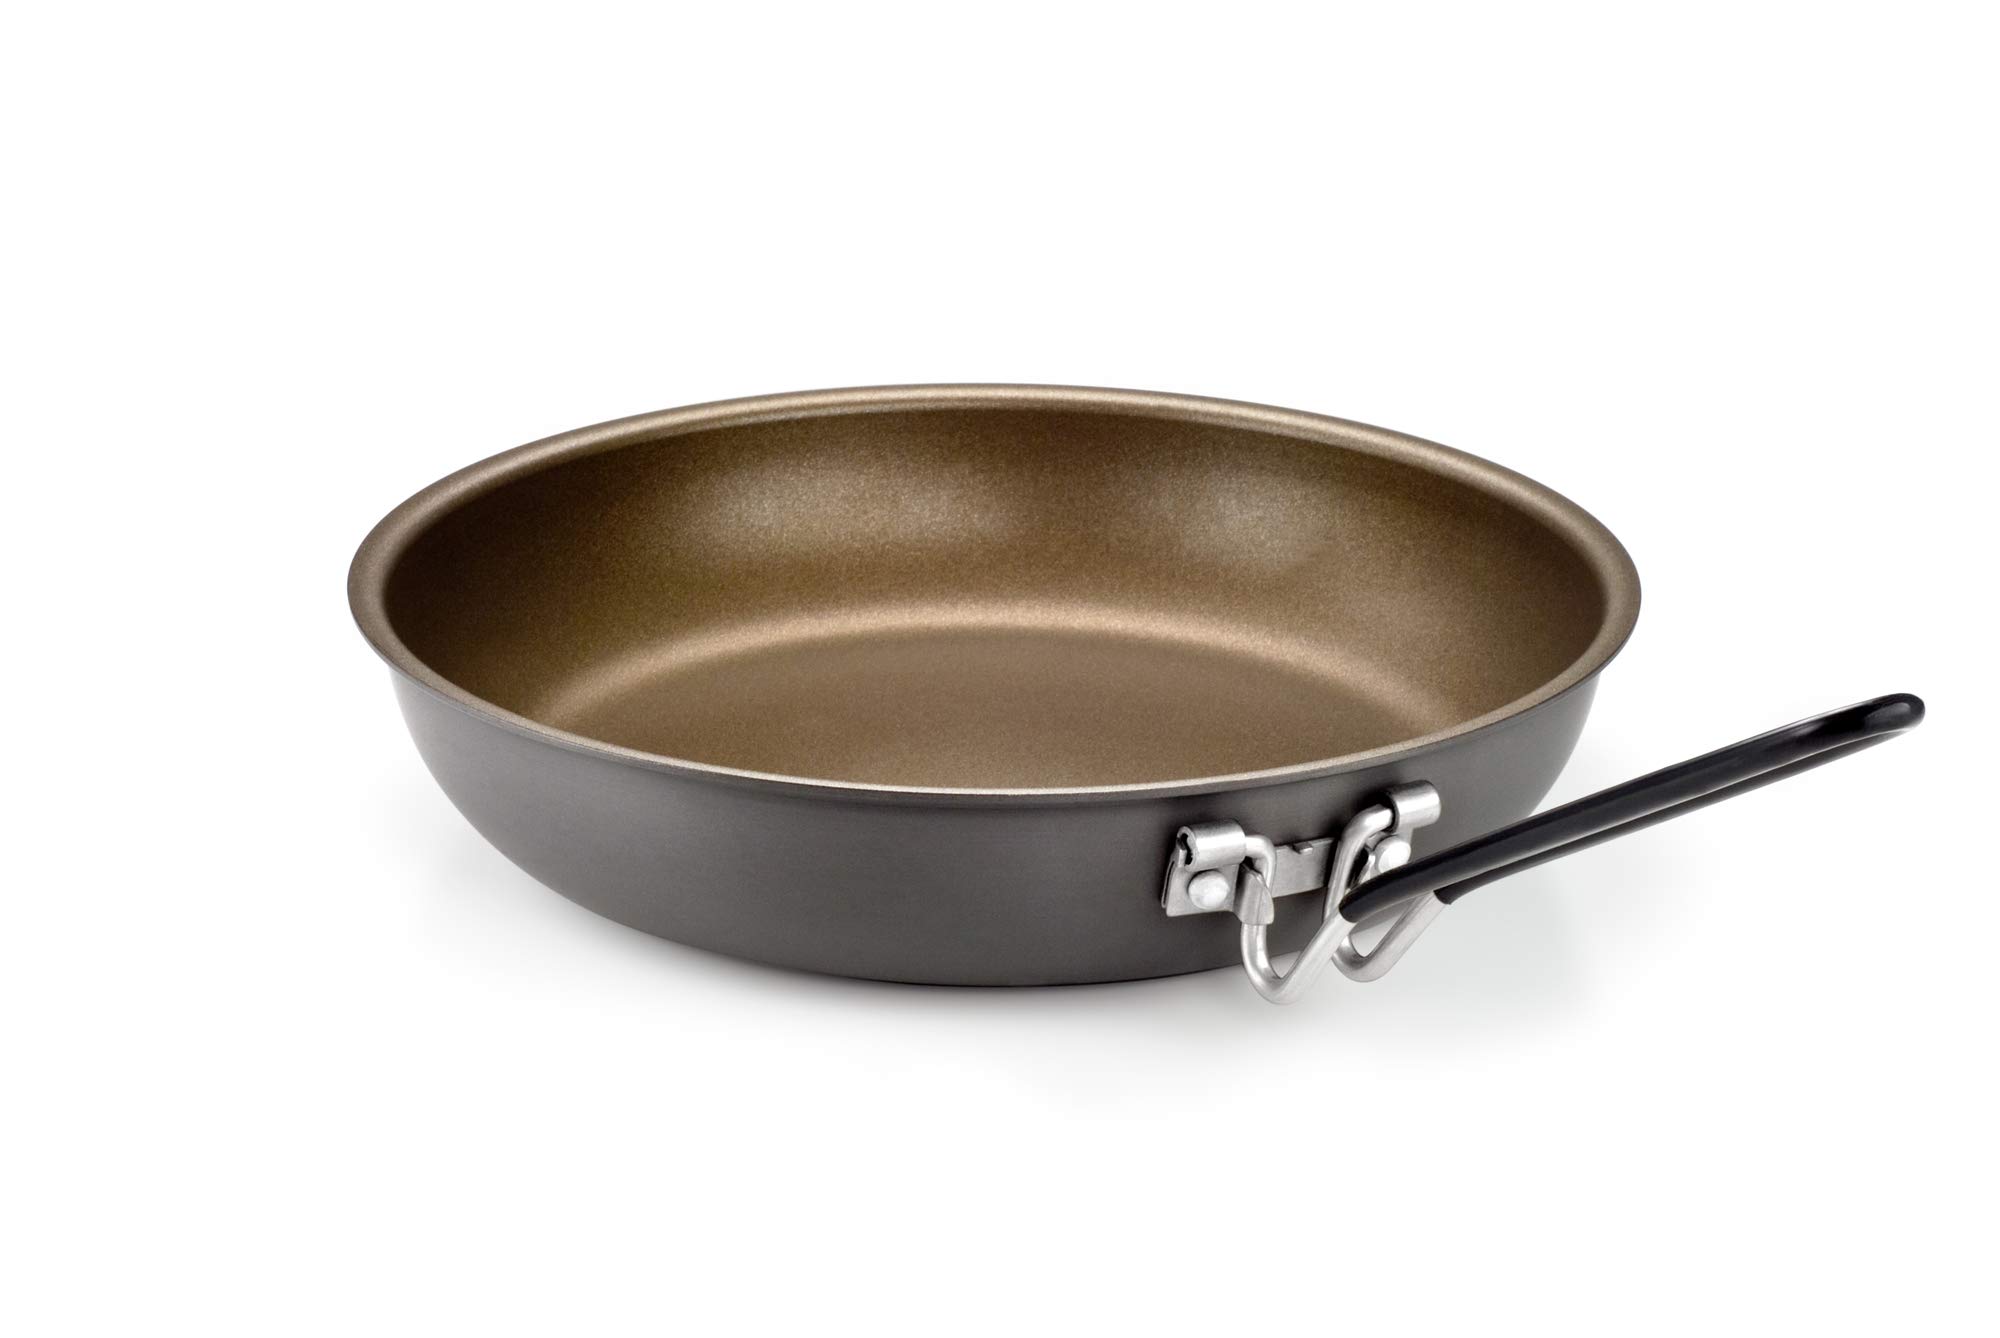 Gsi Outdoors, Pinnacle Bratpfanne, Superior Backcountry Cookware since 1985, 25,4 cm